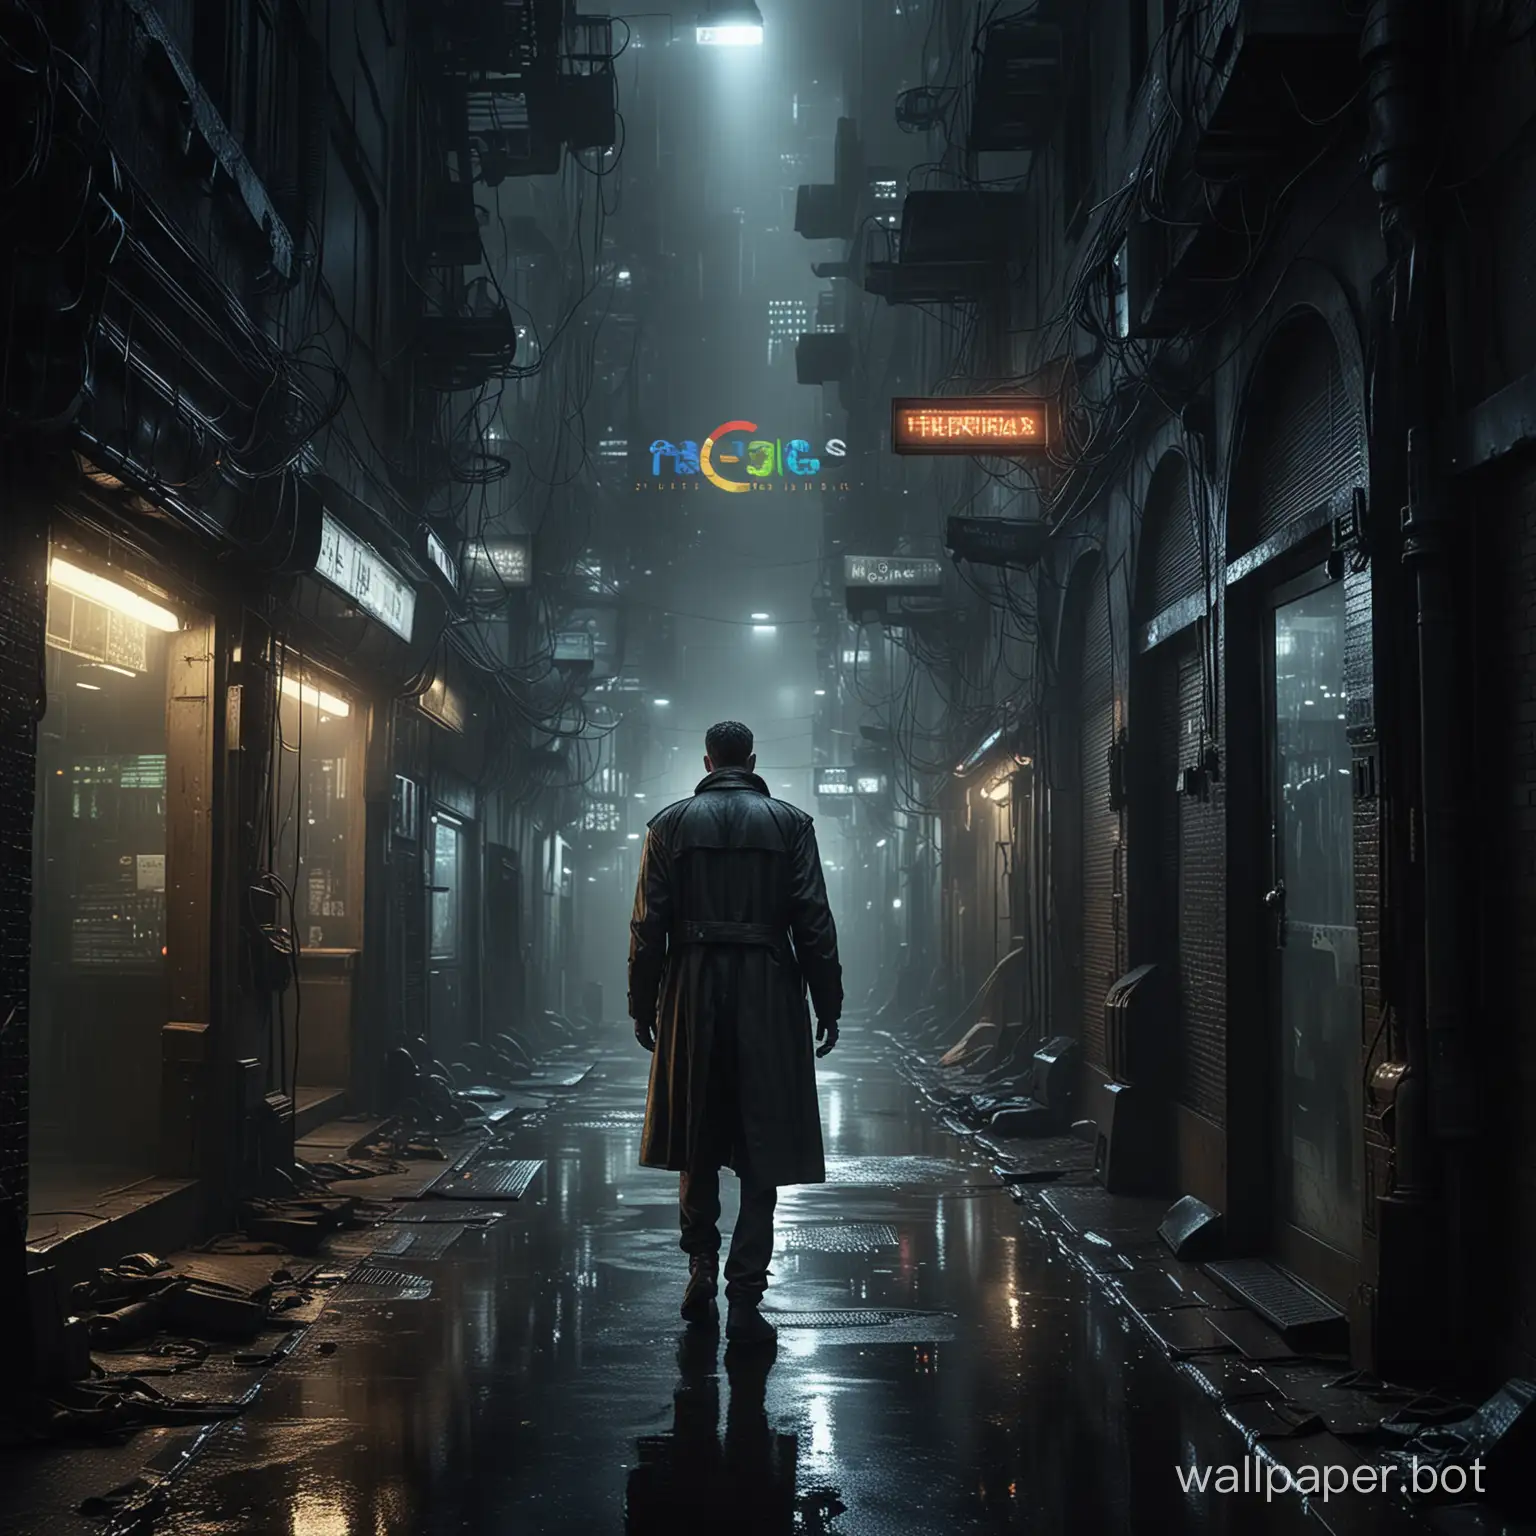 Blade-Runner-Inspired-Spy-Surveillance-with-Distant-Google-Sign-and-Spotlights